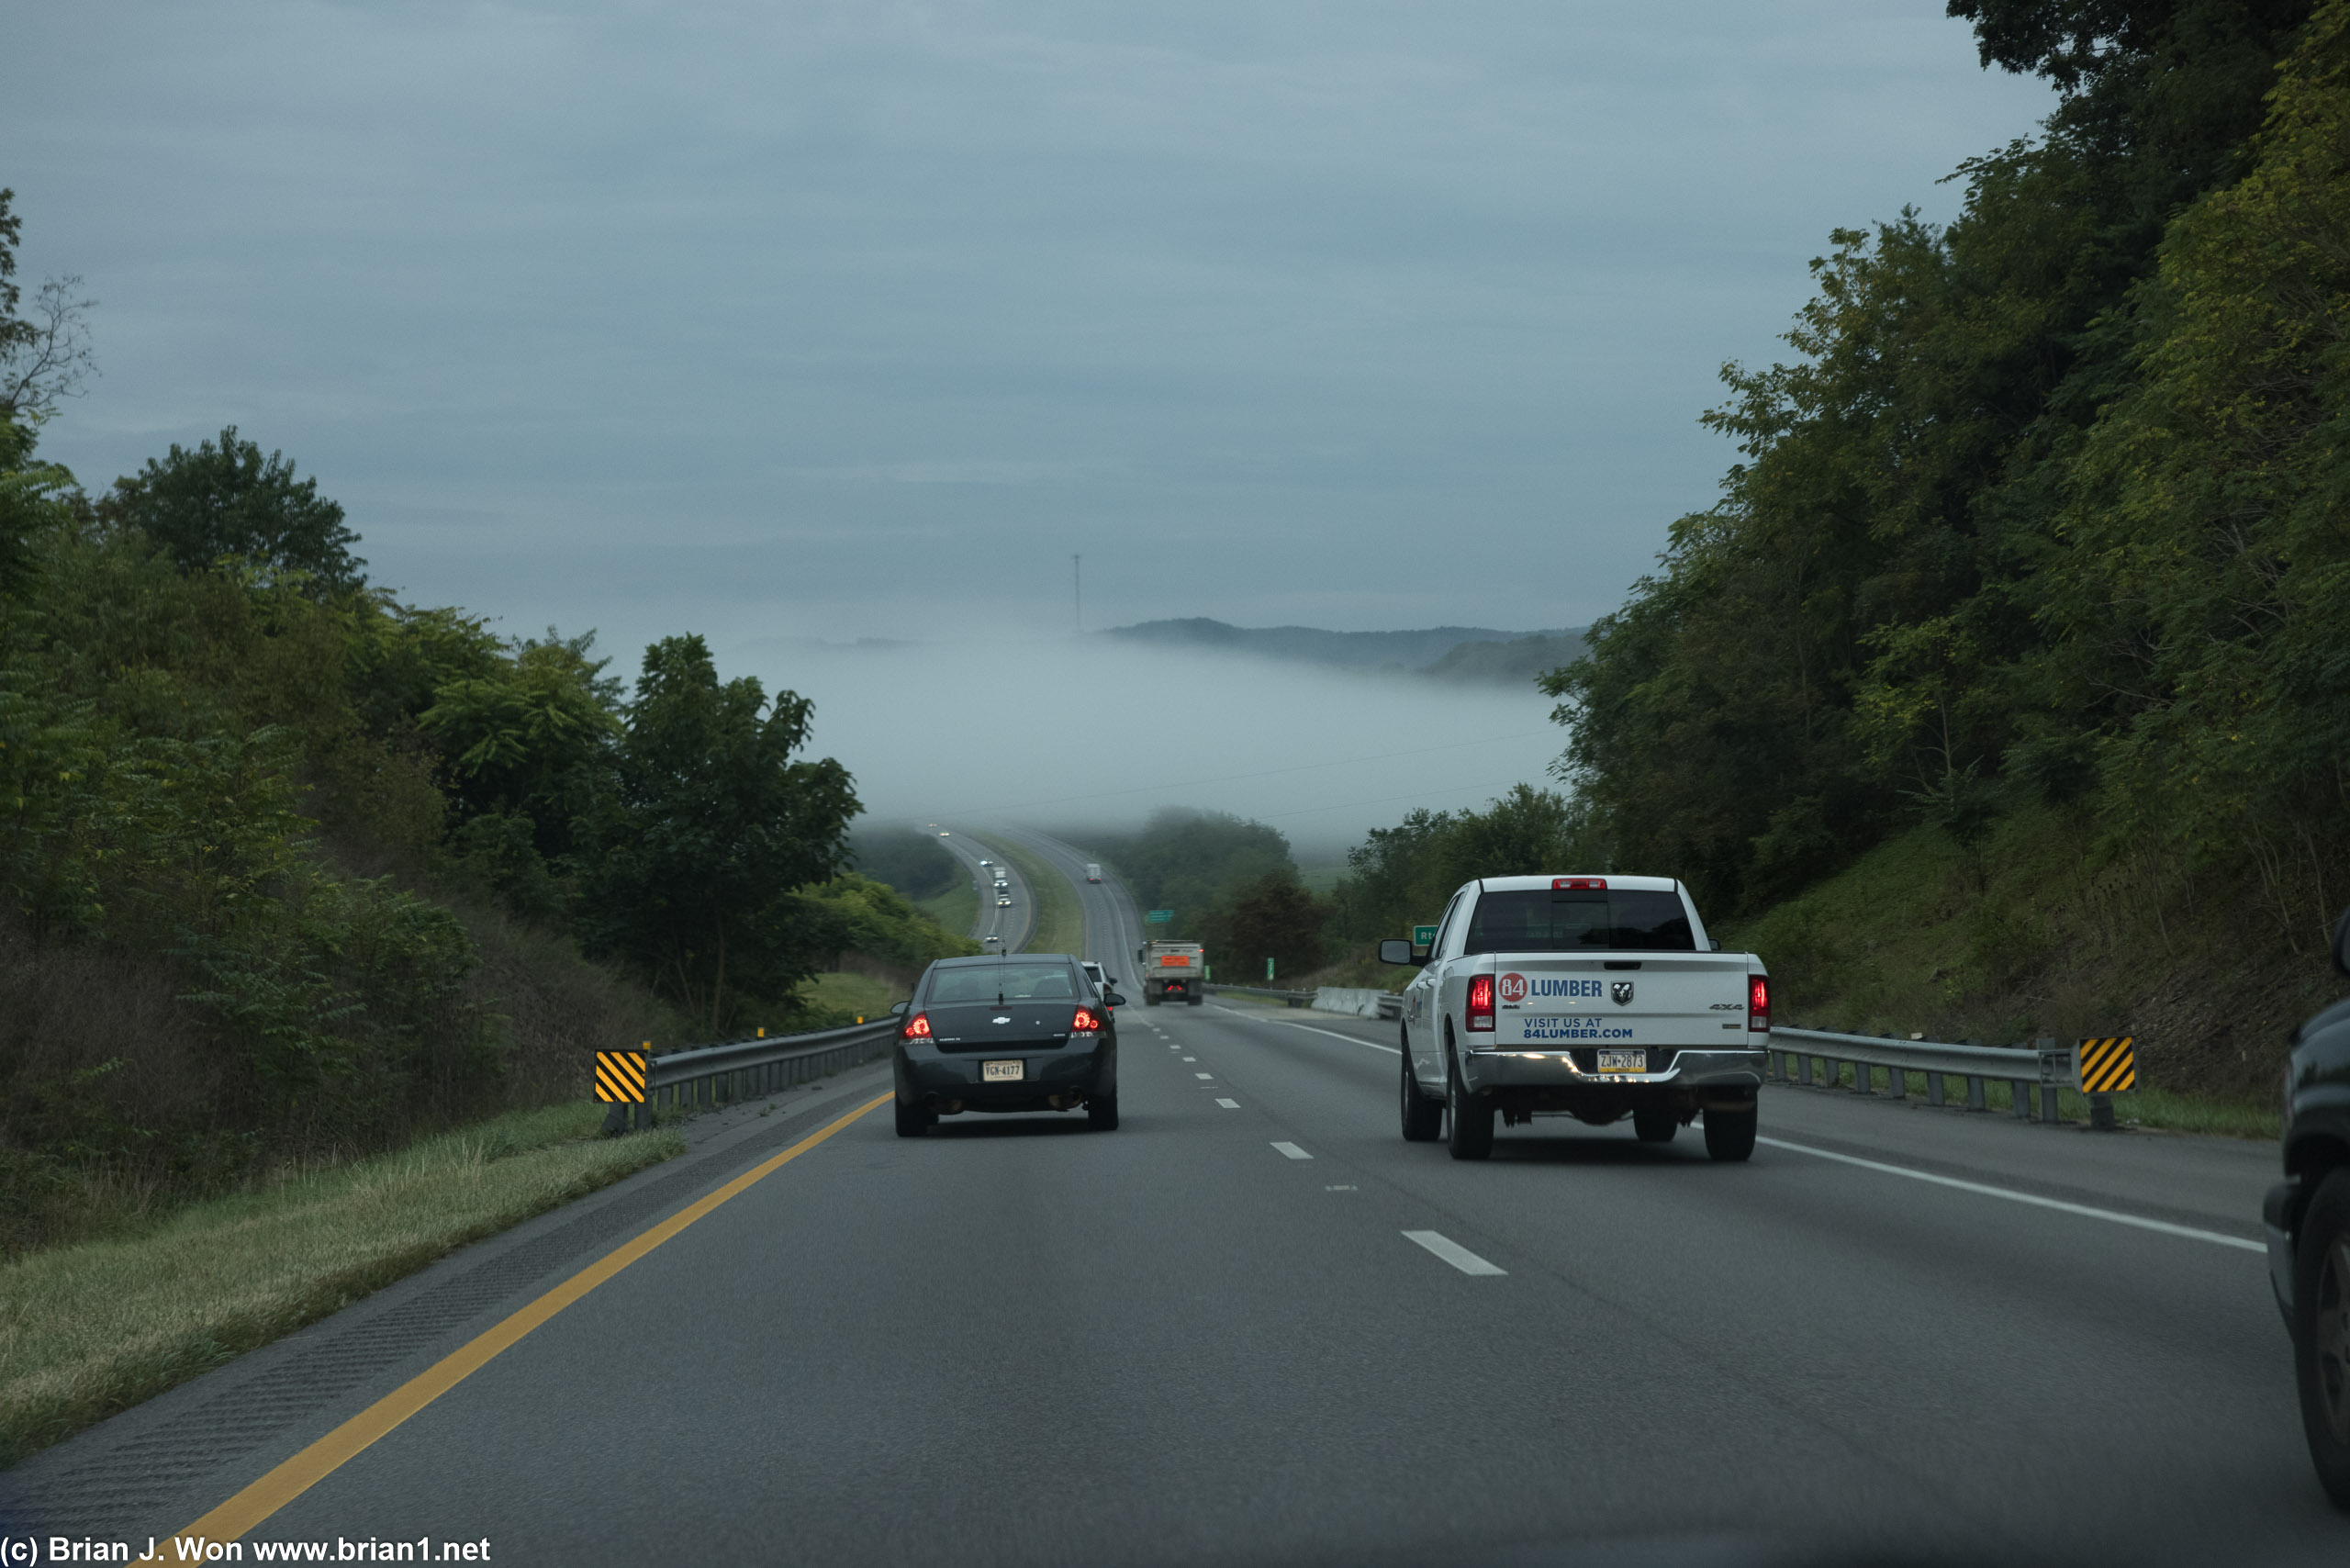 Low clouds or fog?